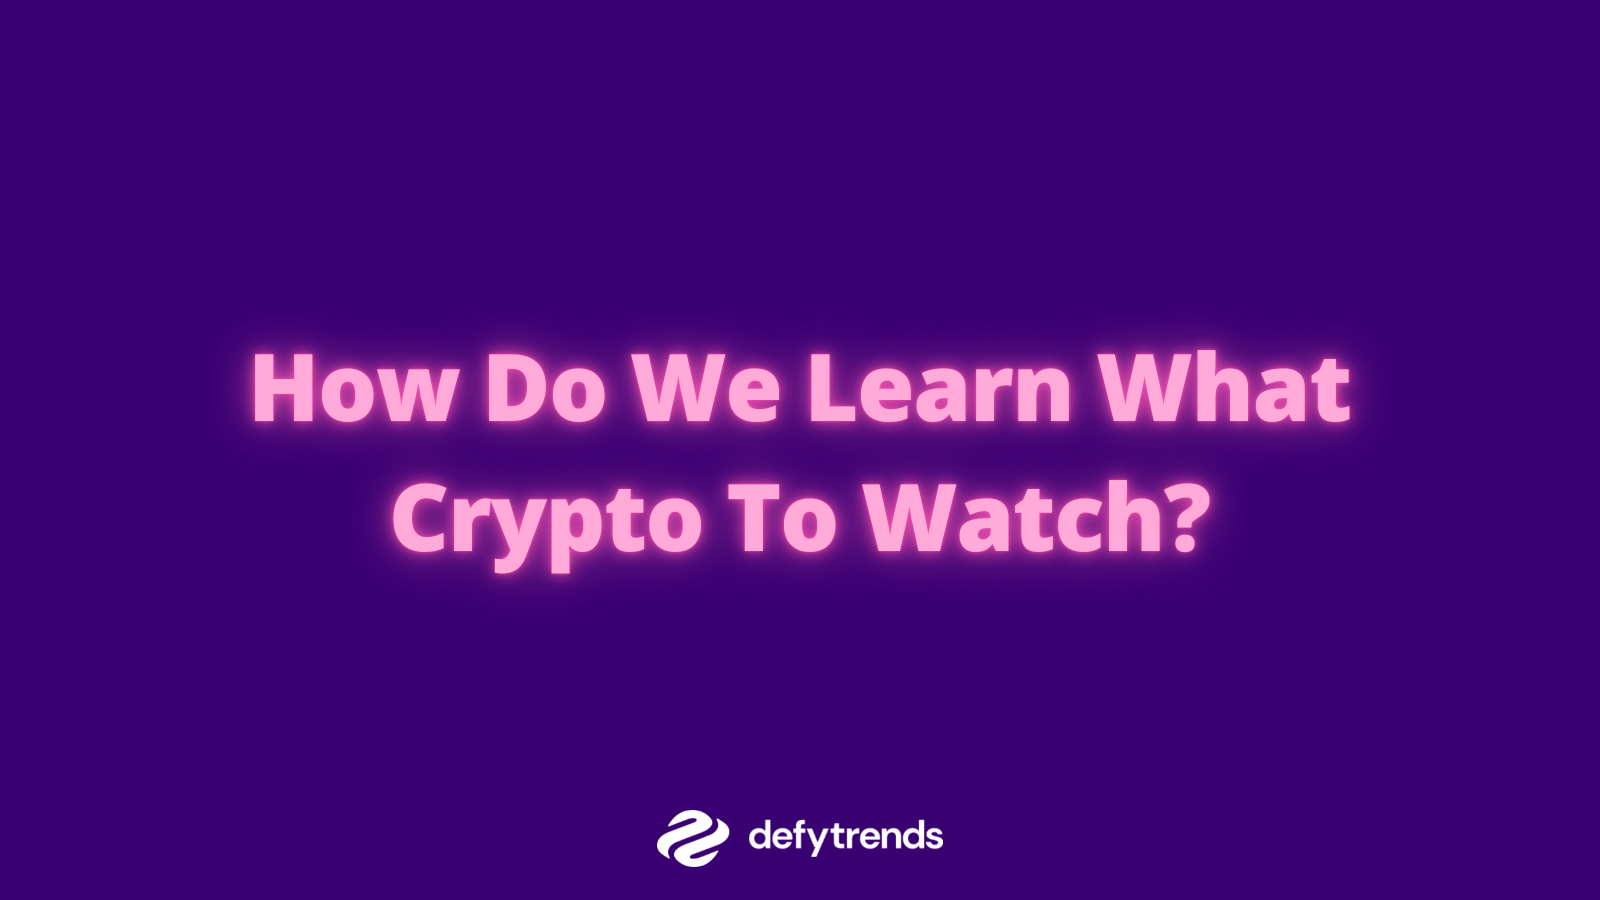 How Do We Learn What Crypto To Watch?